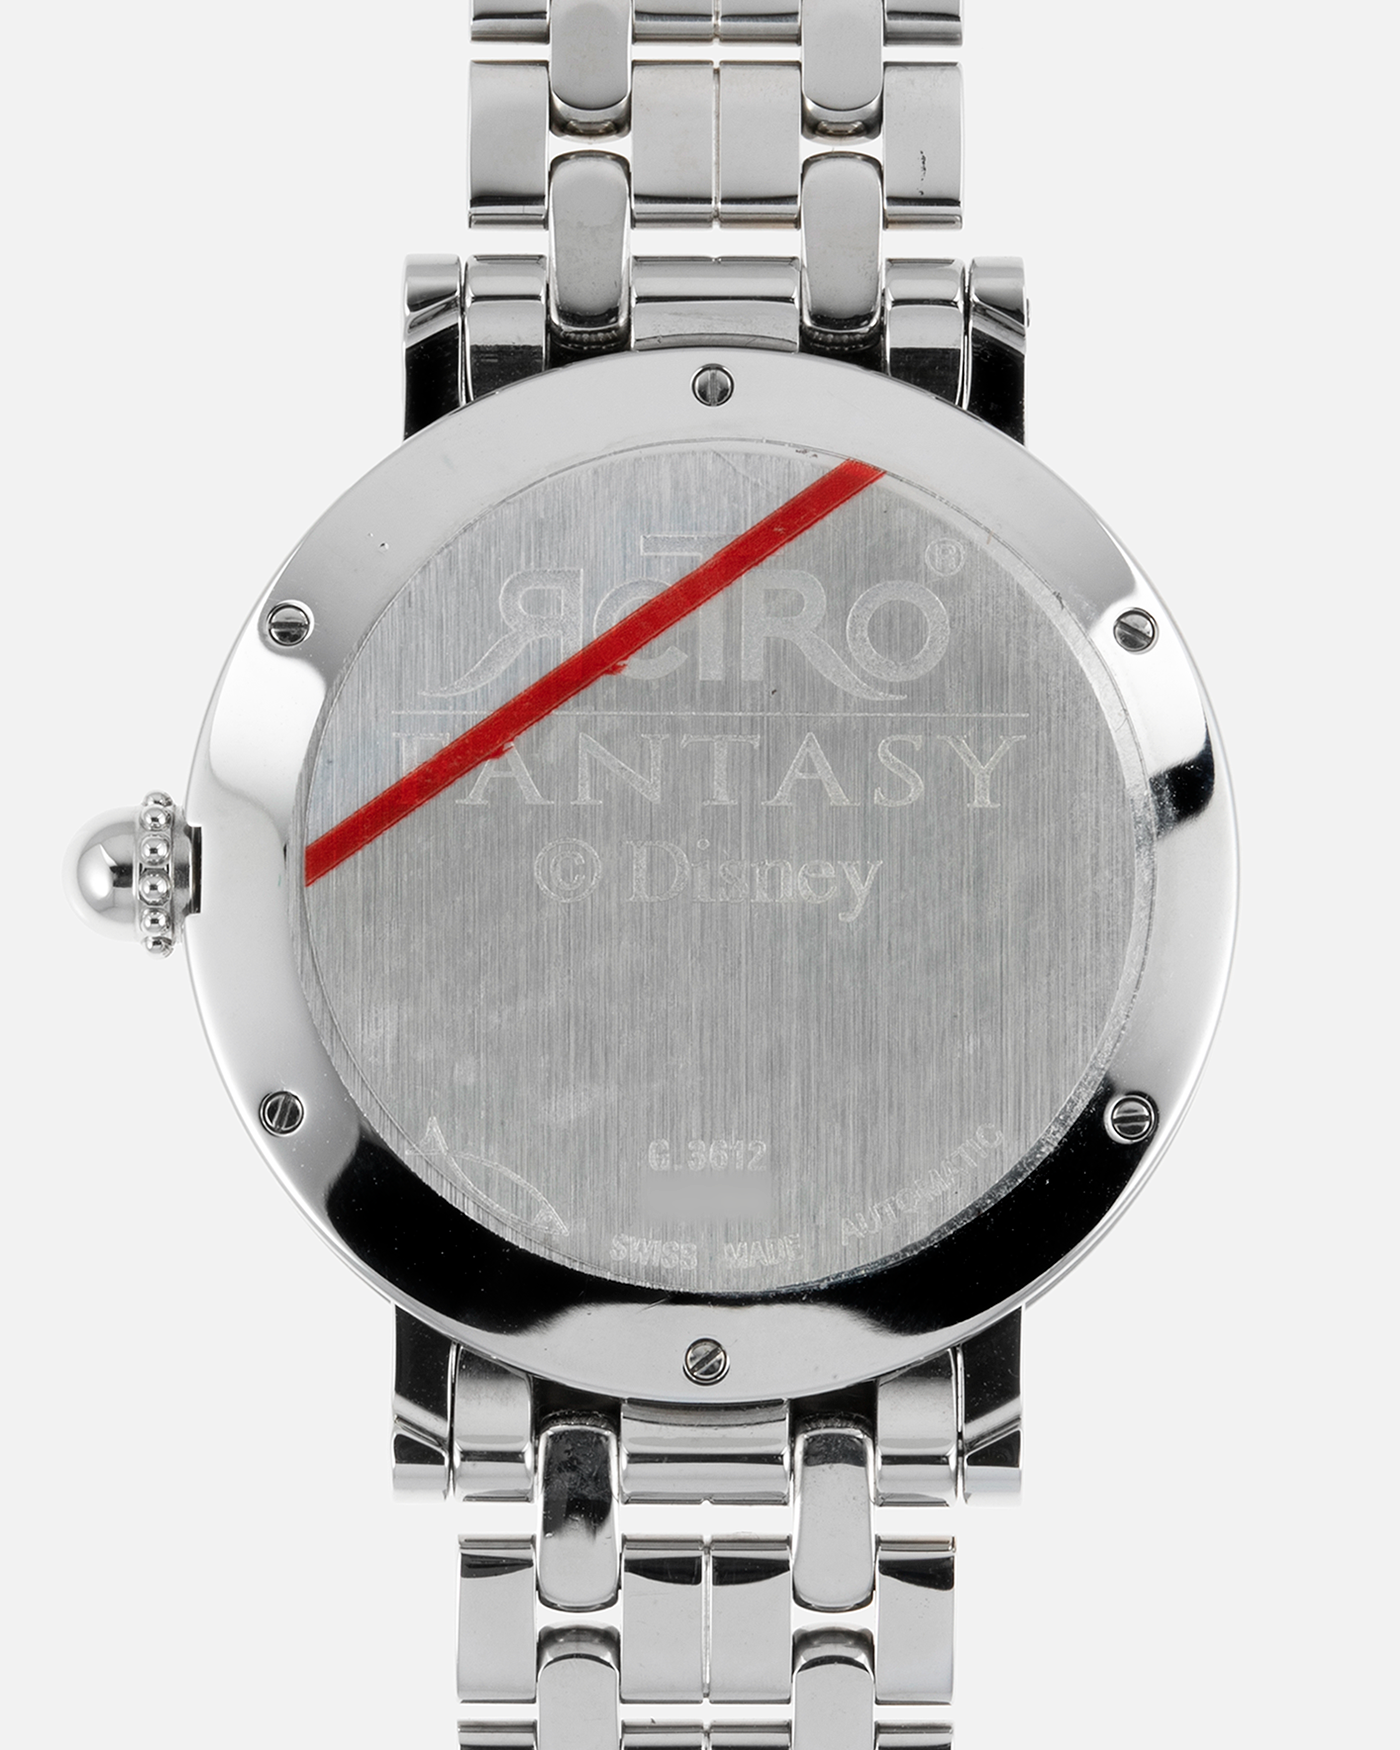 Brand: Gerald Genta Year: 1990’s Model: Ref. 3632G Retro “Mickey Mouse” Material: Stainless Steel case, Mother of Pearl dial Movement: Cal. ETA 2892A2, Self-Winding Case Diameter: 36mm Bracelet/Strap: Gerald Genta Stainless Steel Bracelet with Genta Signed Clasp